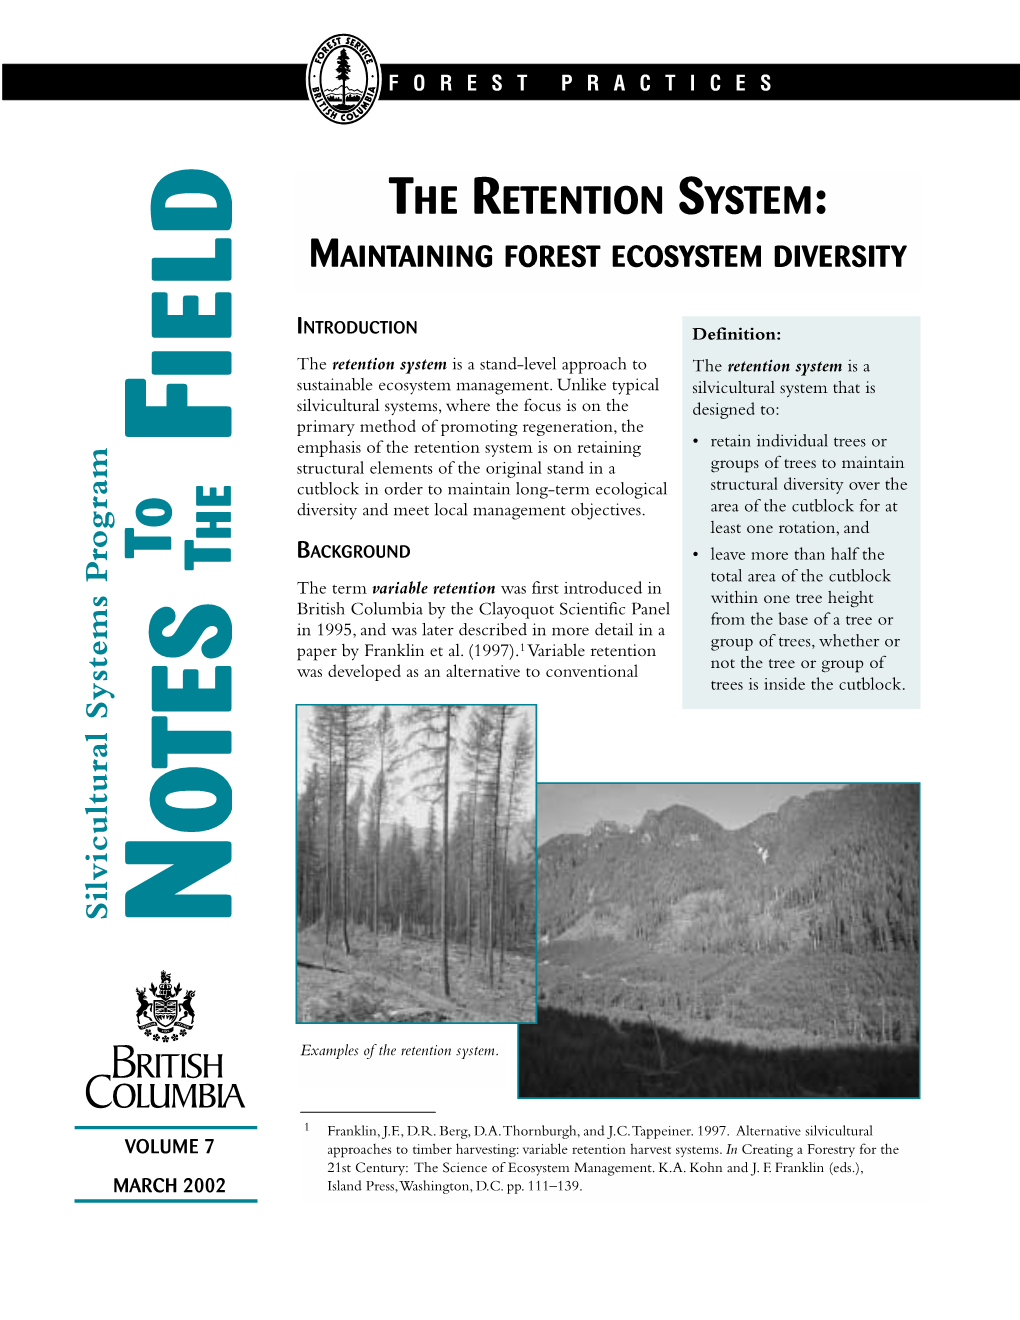 The Retention System: Maintaining Forest Ecosystem Diversity